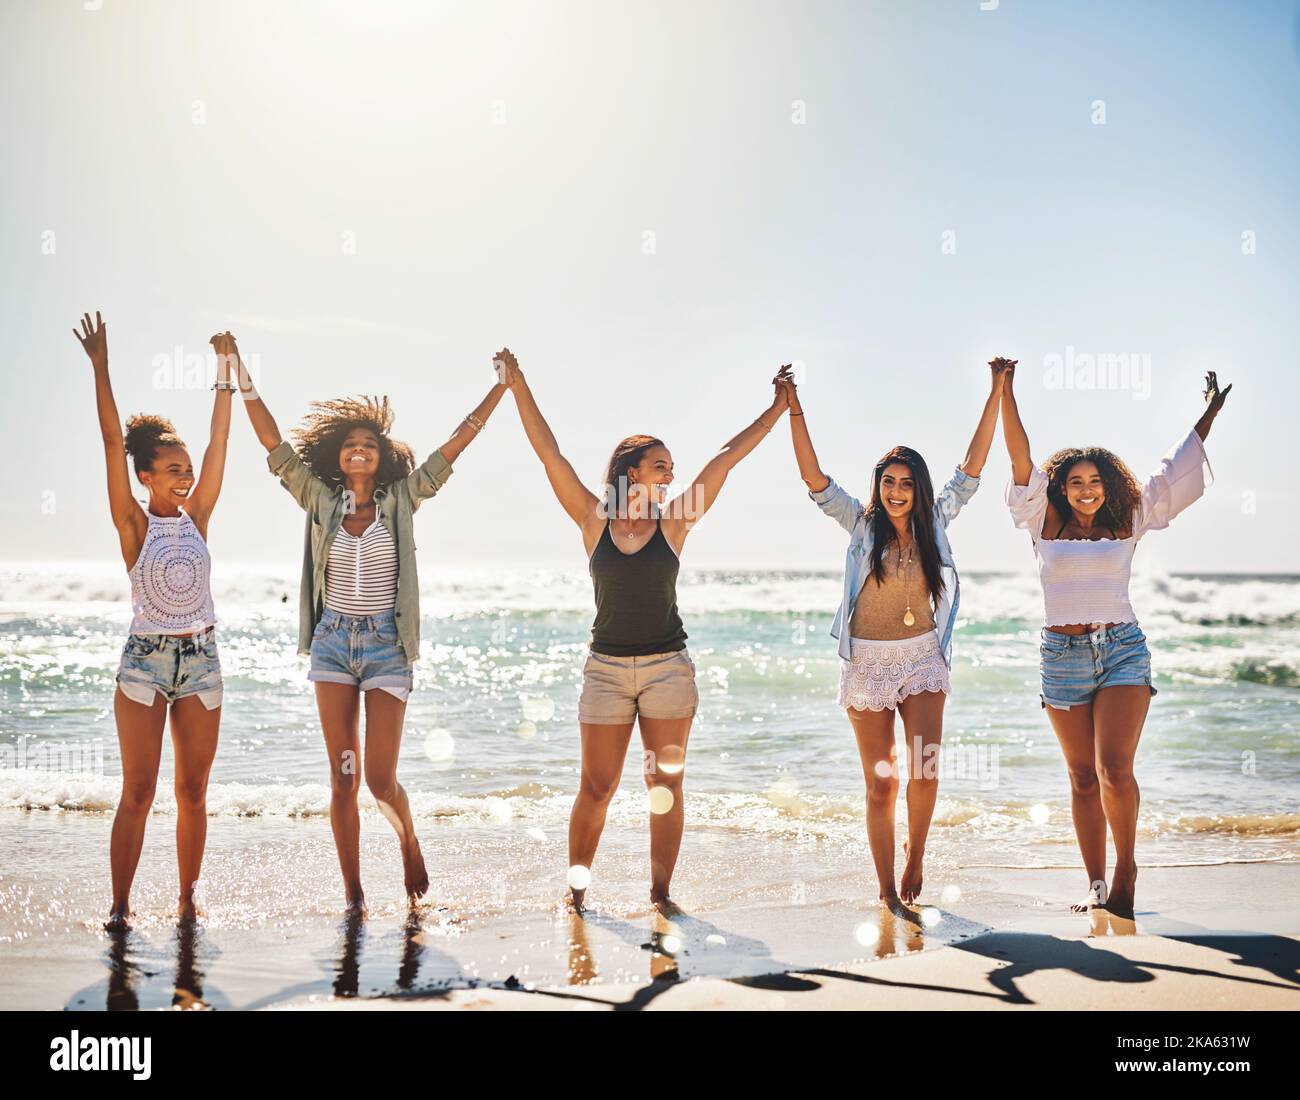 Bring on the good times. a group of cheerful friends holding hands on the beach. Stock Photo